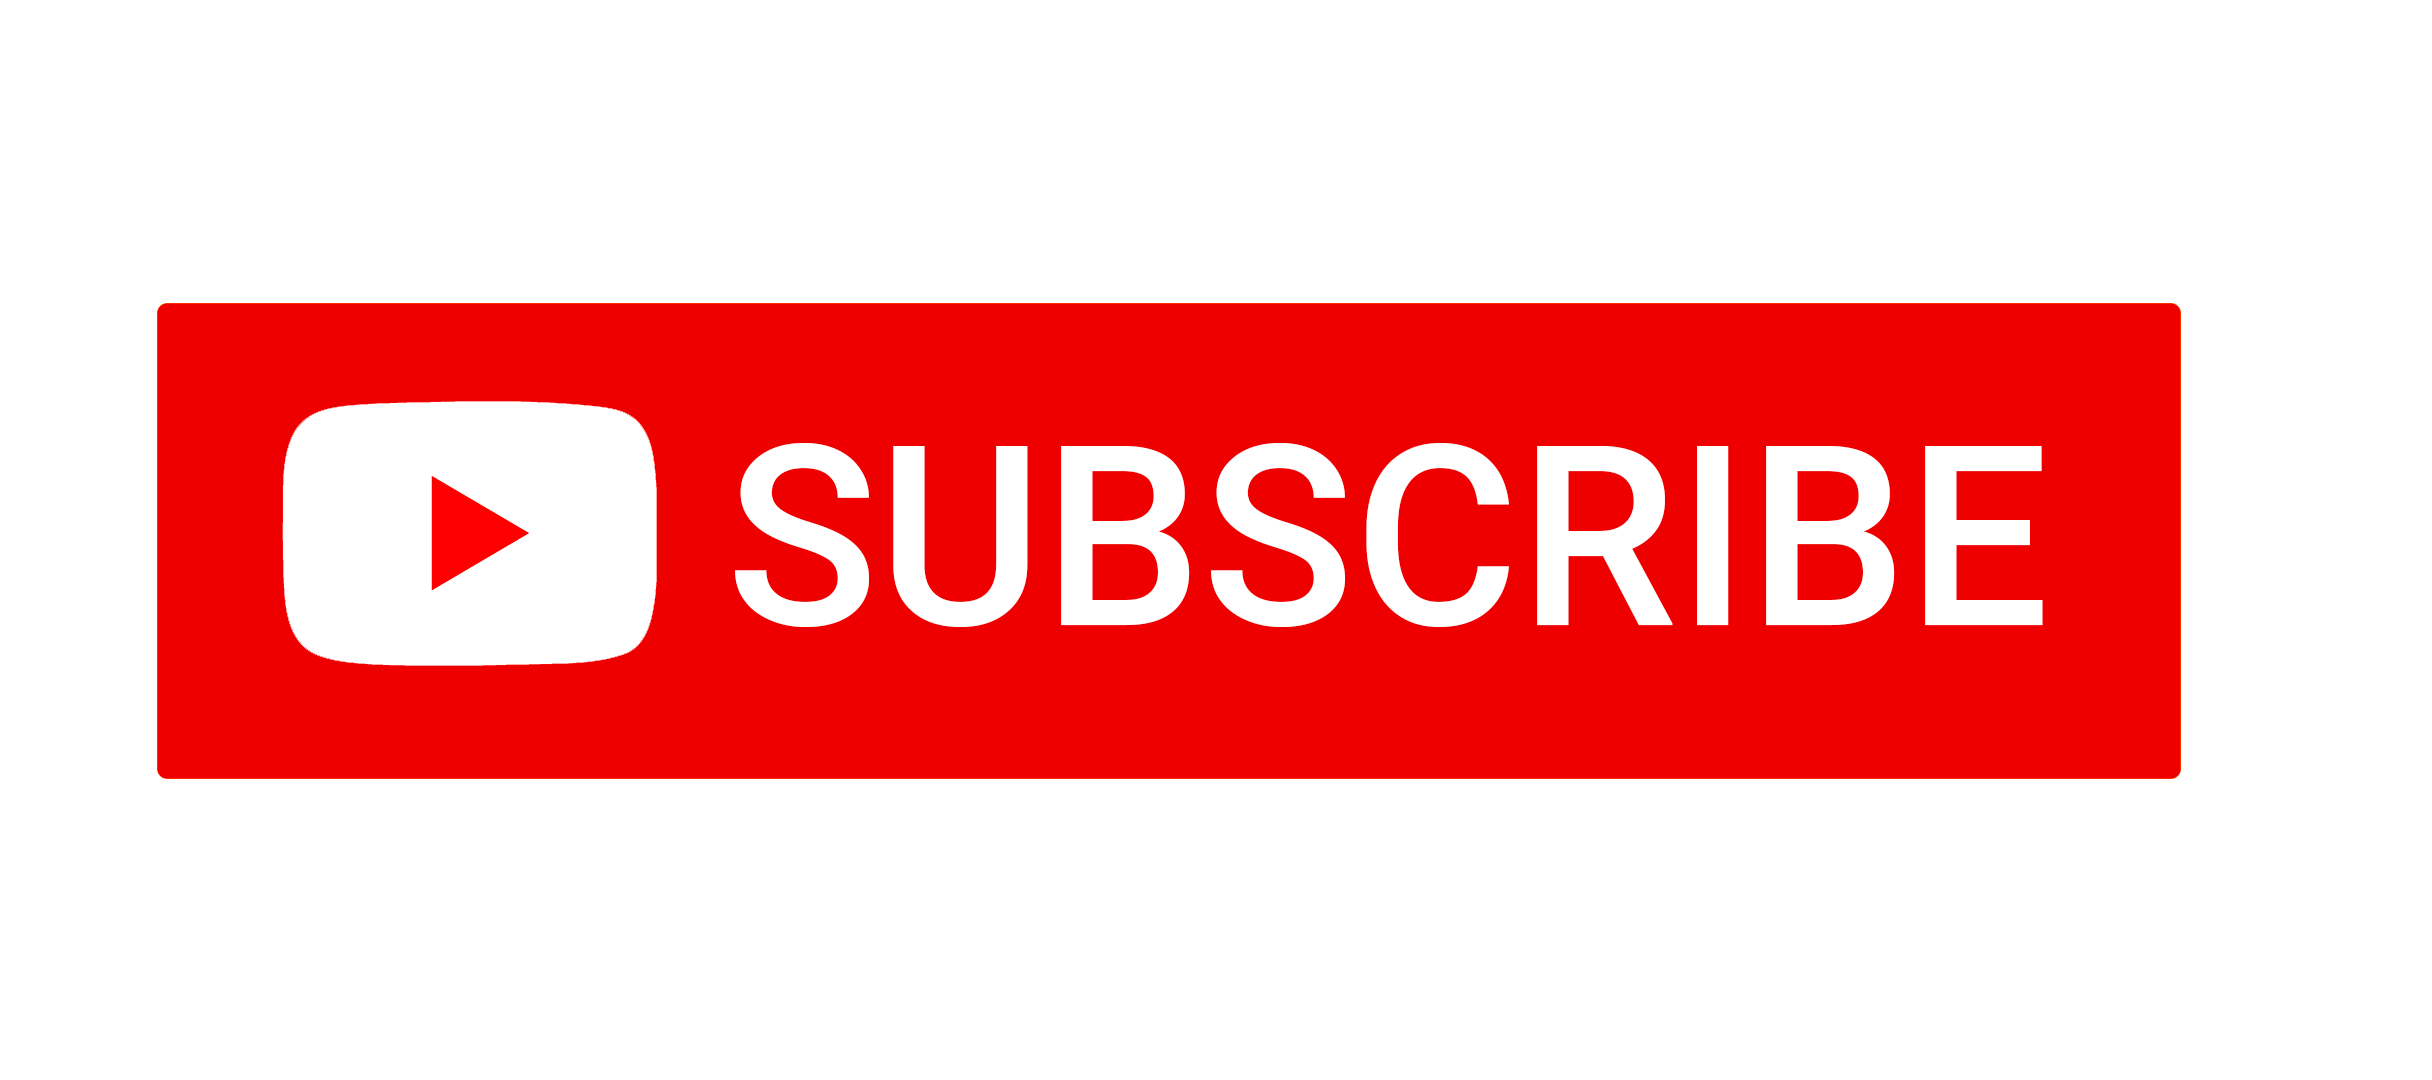 youtube subscribe animation template free download